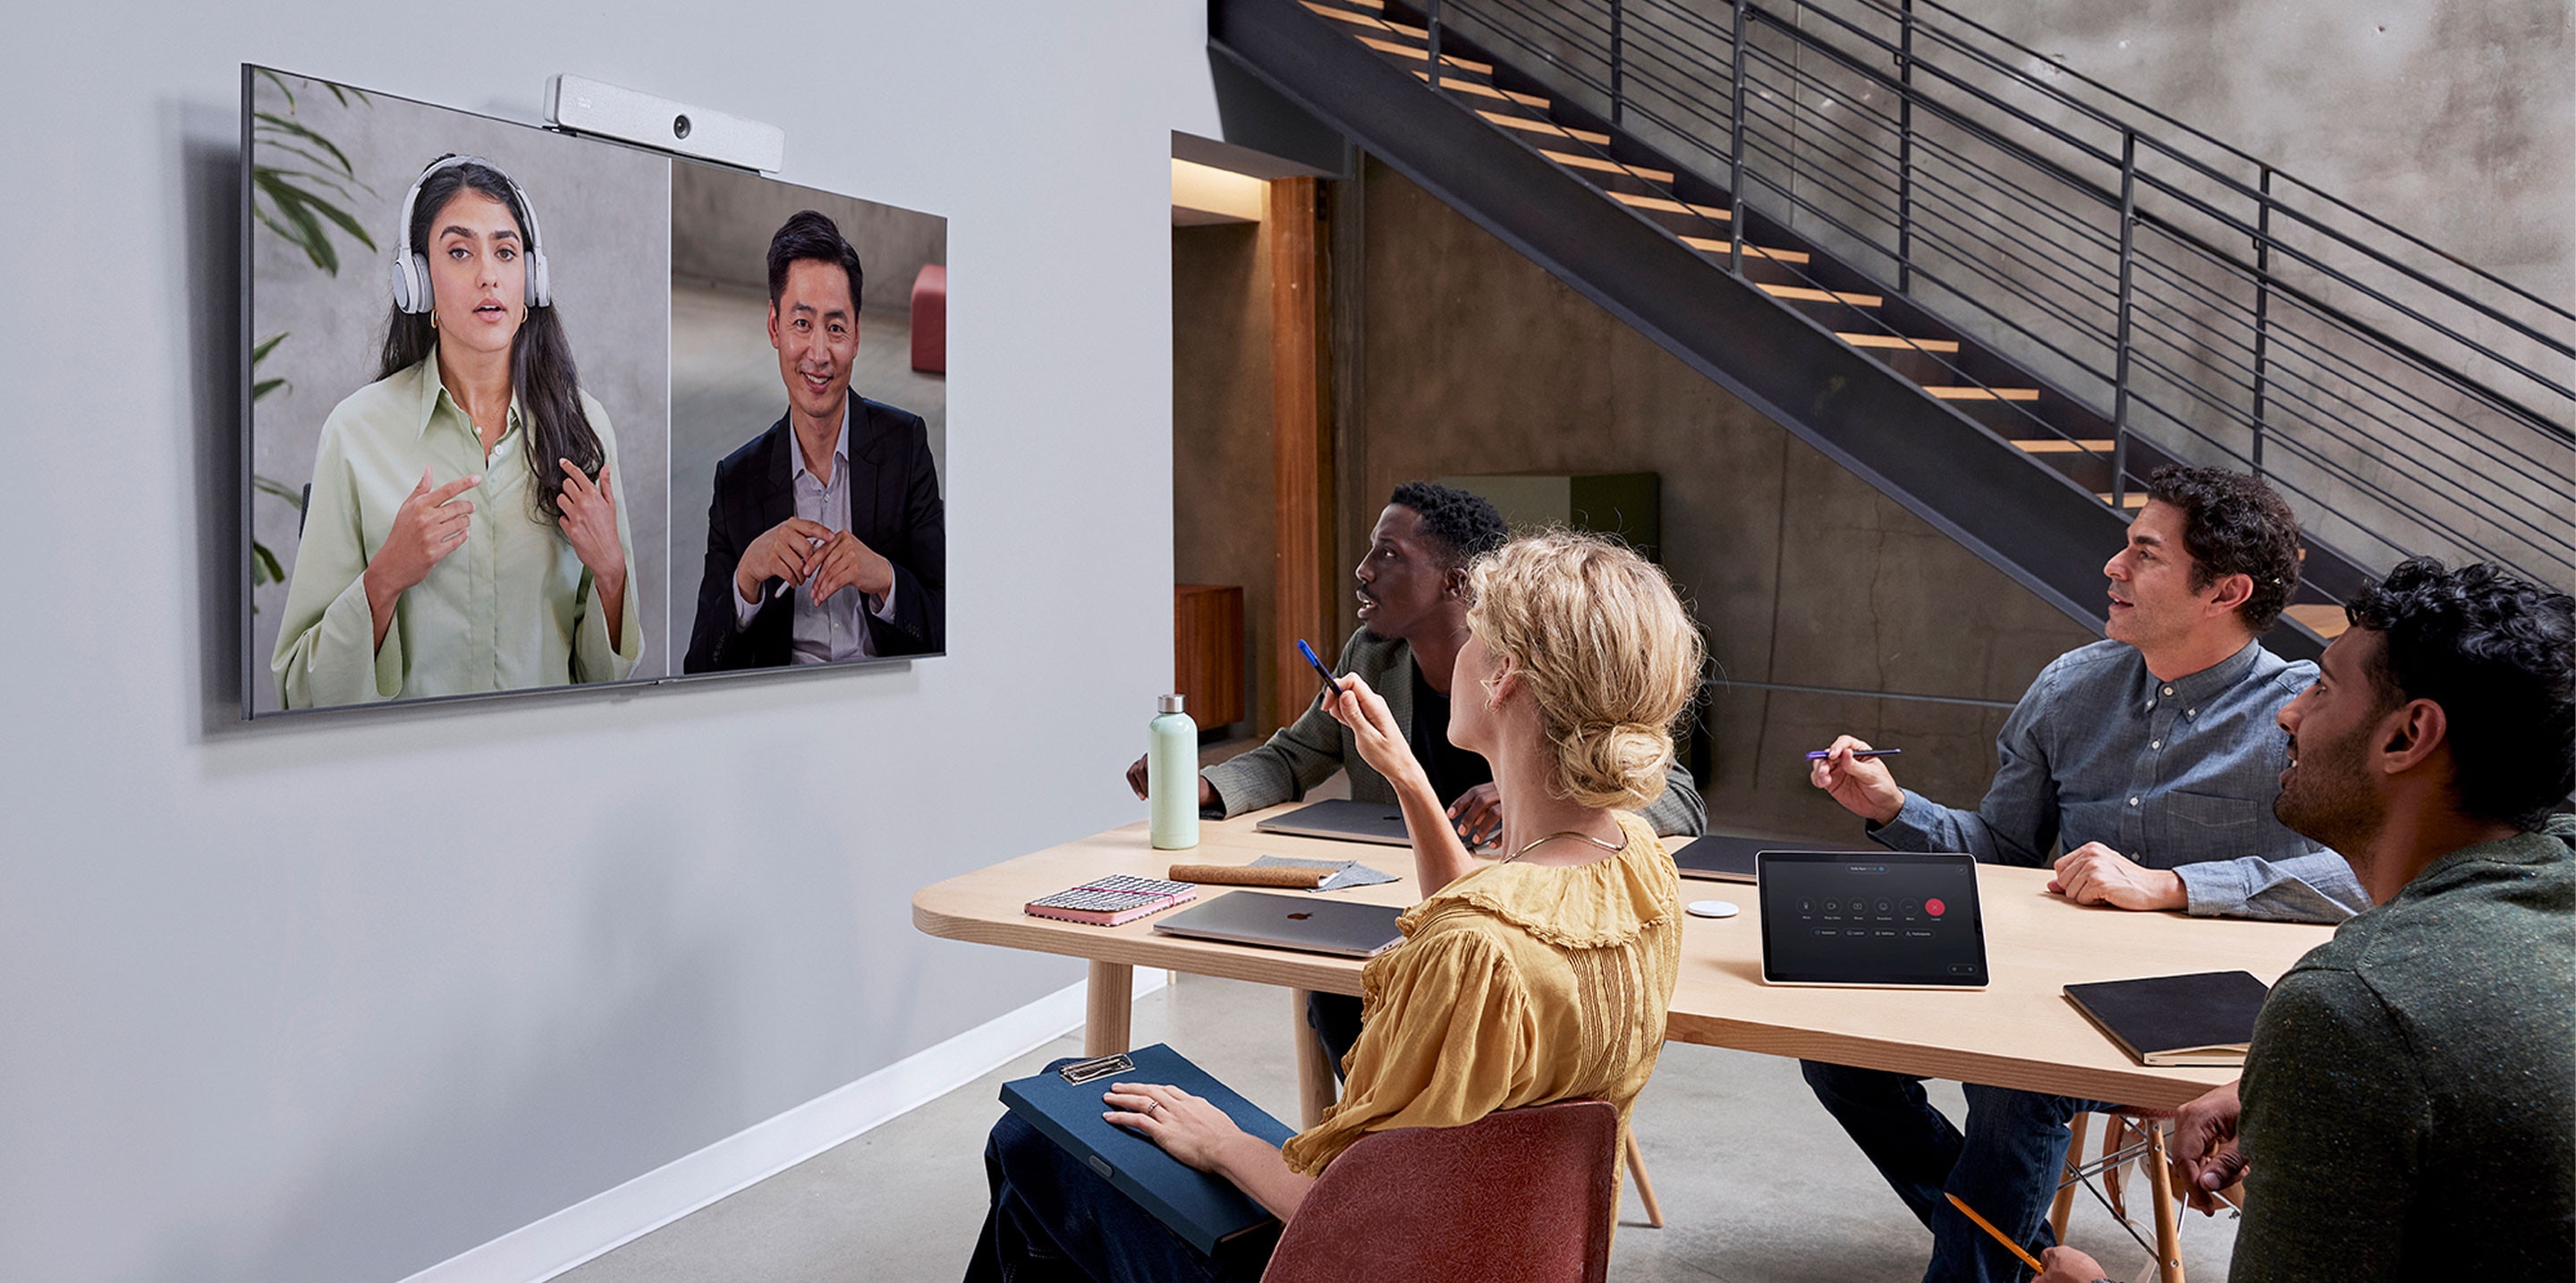 4 colleagues in an open shared space collaborate with 2 colleagues via a video meeting using the Cisco Room Bar video bar.